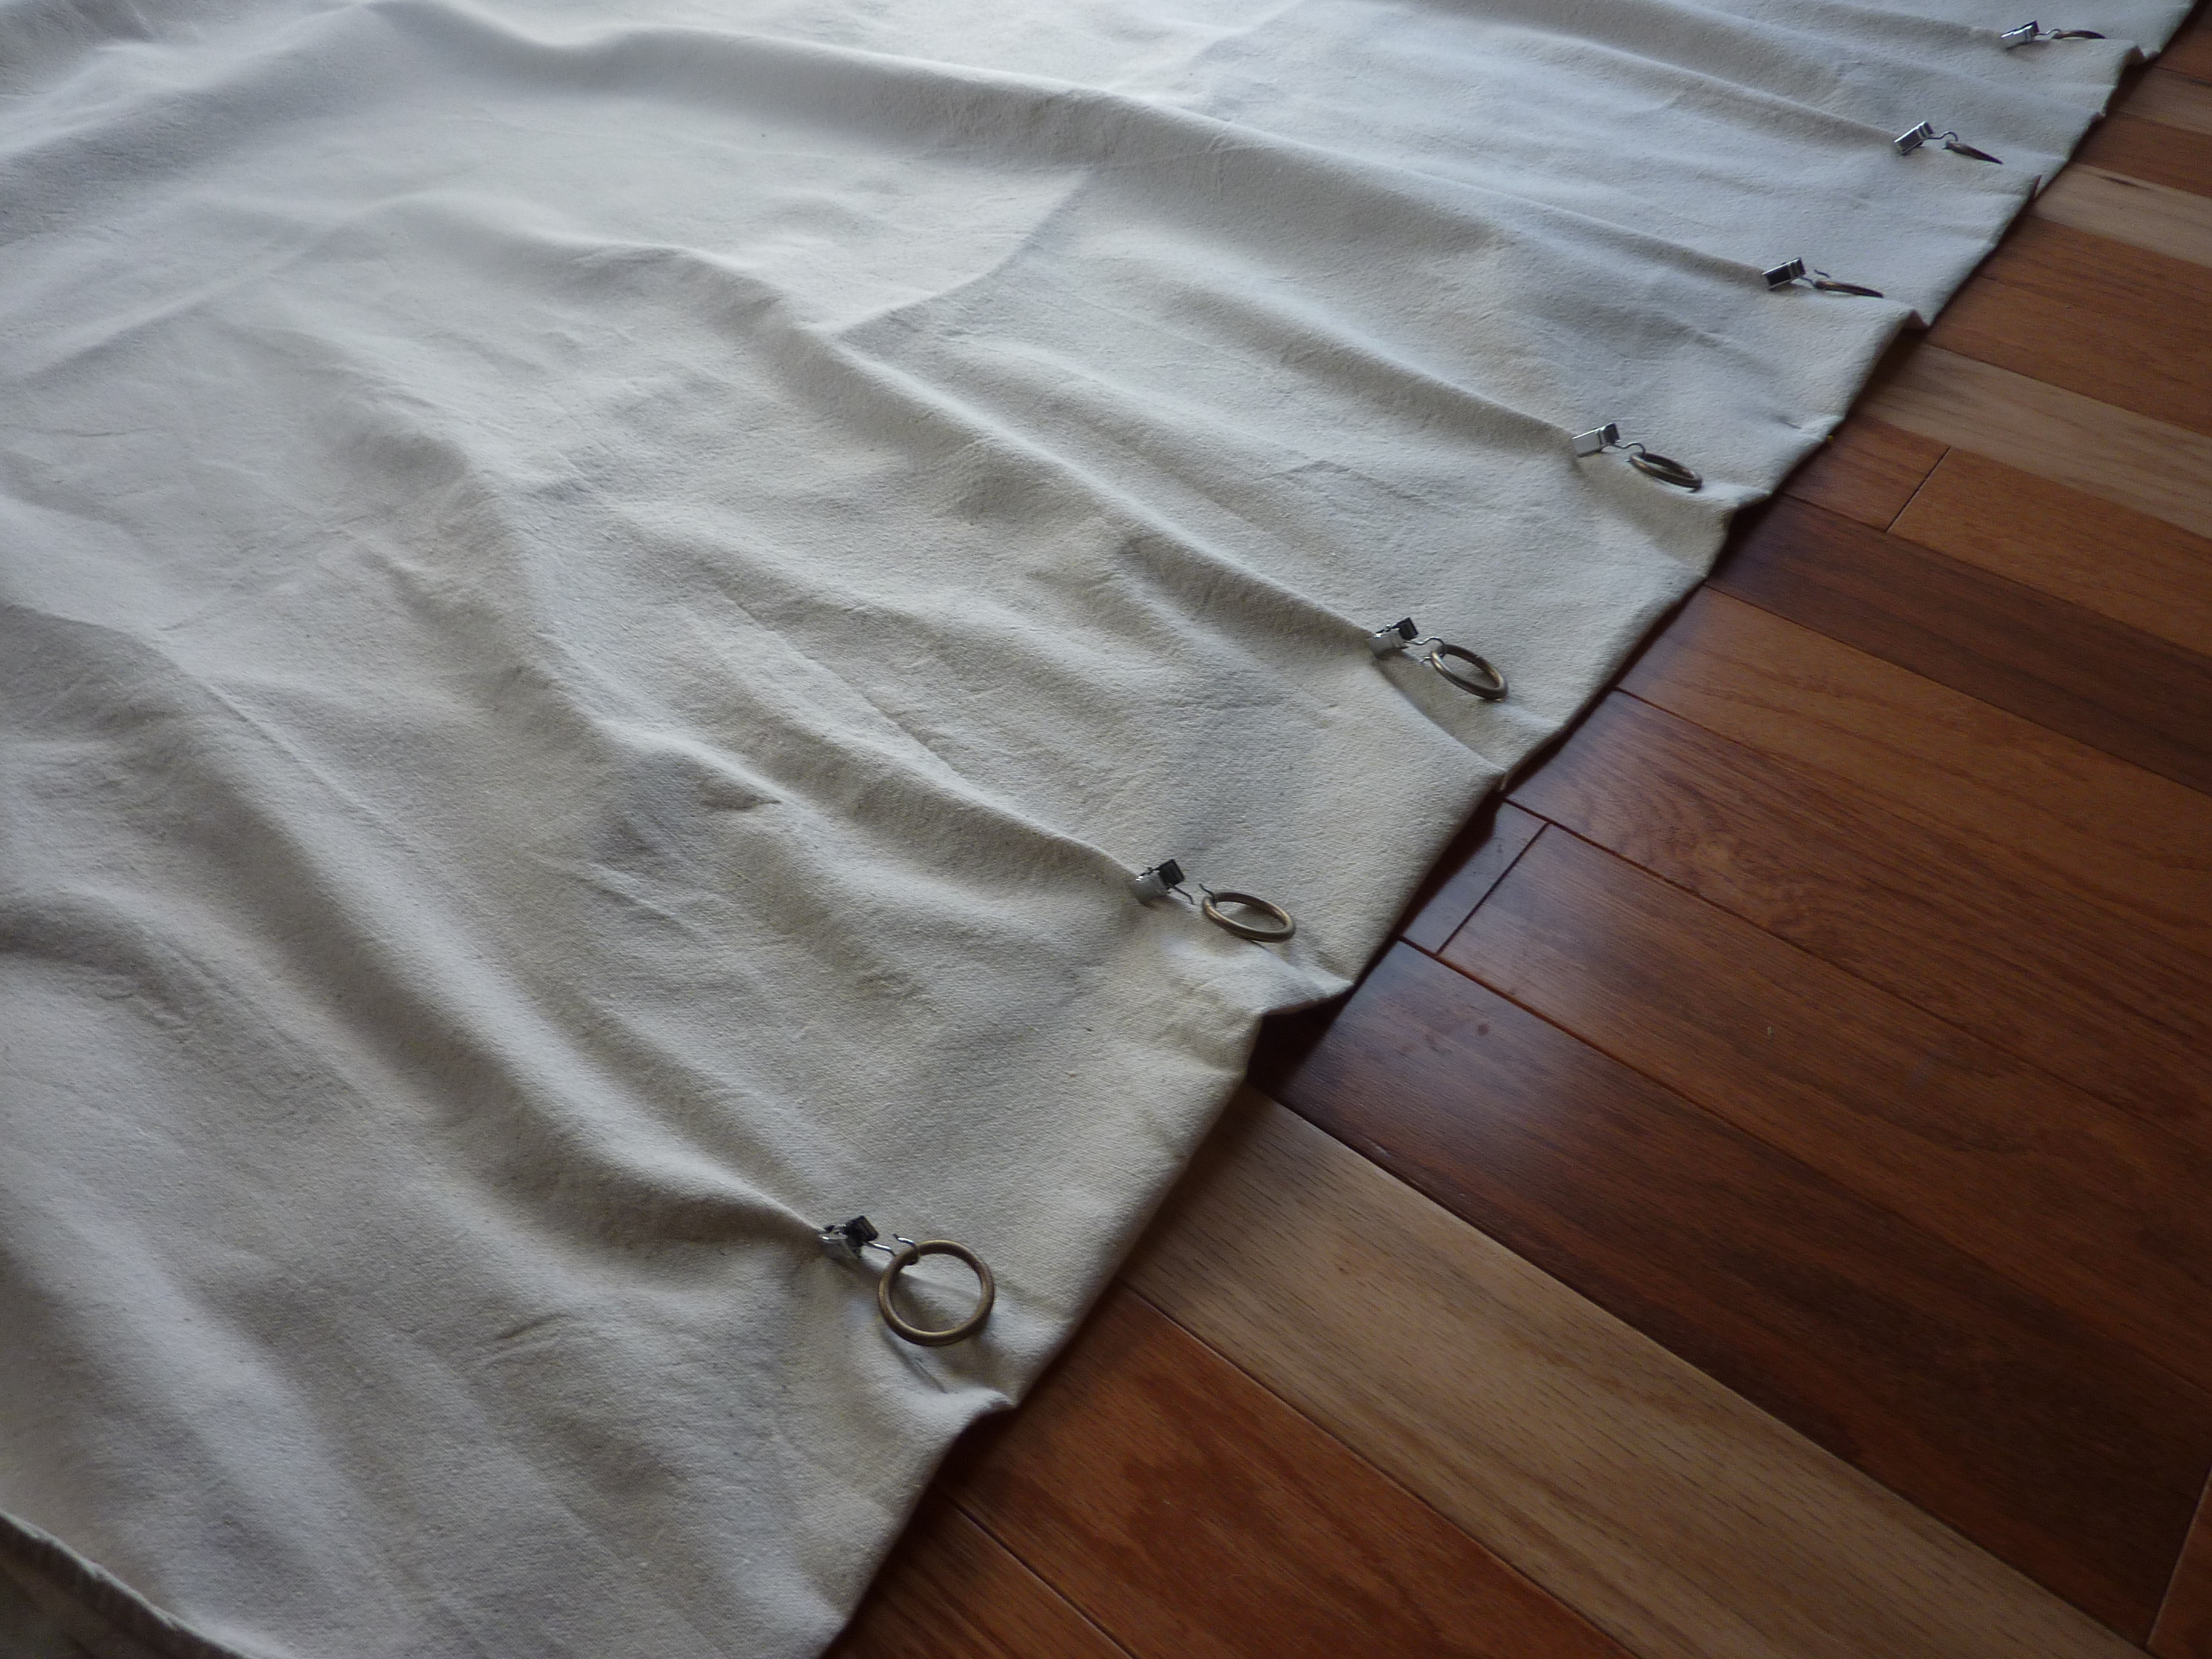 Sewing Rings On Curtains Sewing Skirts